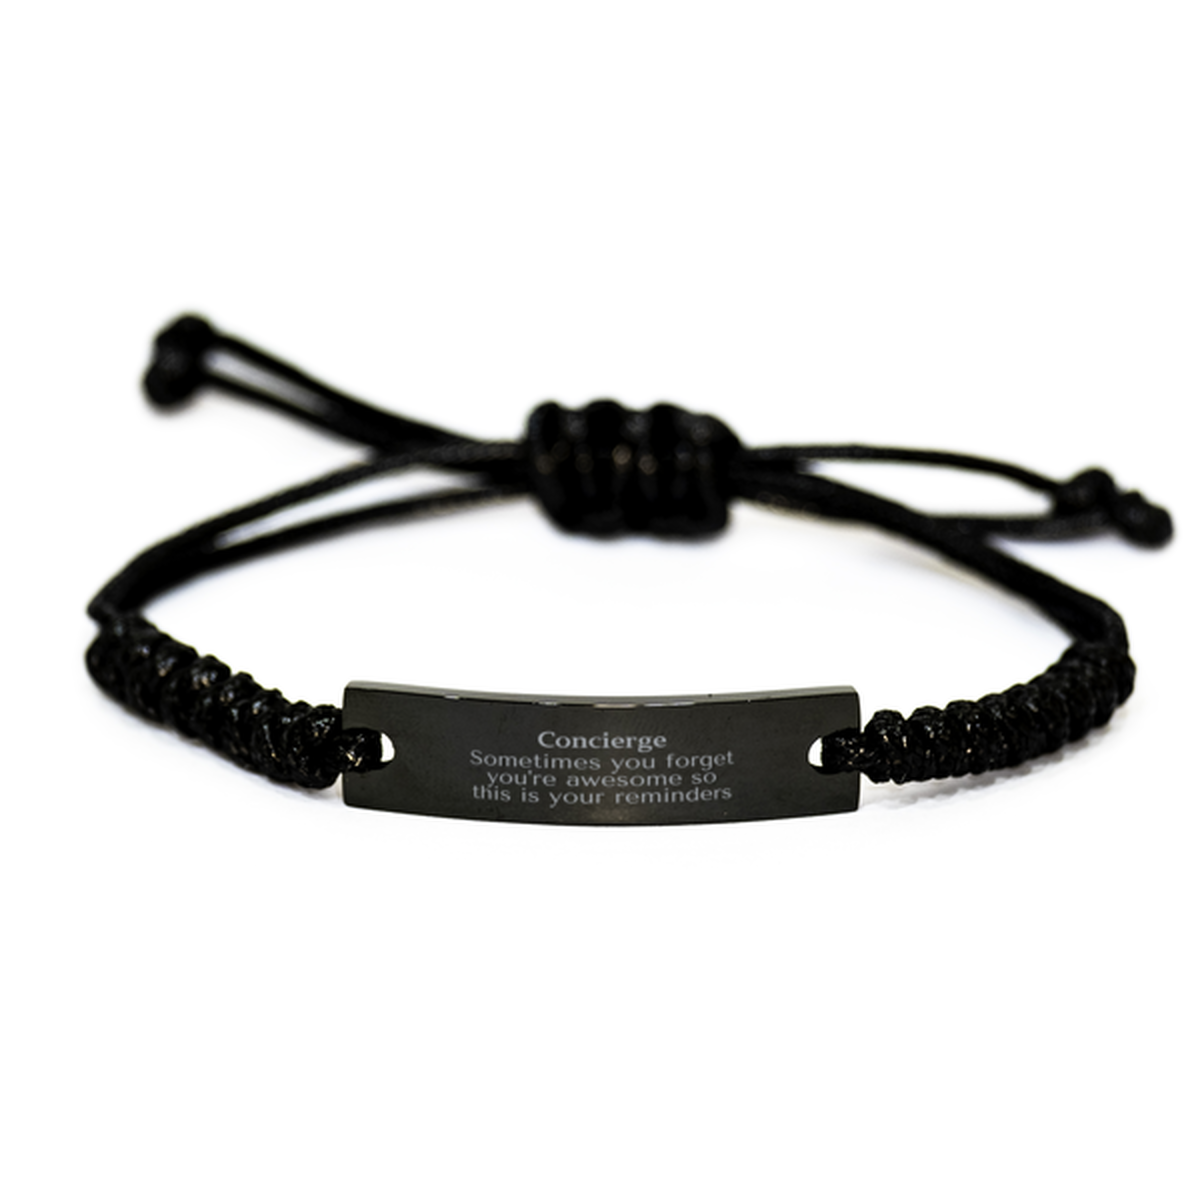 Sentimental Concierge Black Rope Bracelet, Concierge Sometimes you forget you're awesome so this is your reminders, Graduation Christmas Birthday Gifts for Concierge, Men, Women, Coworkers